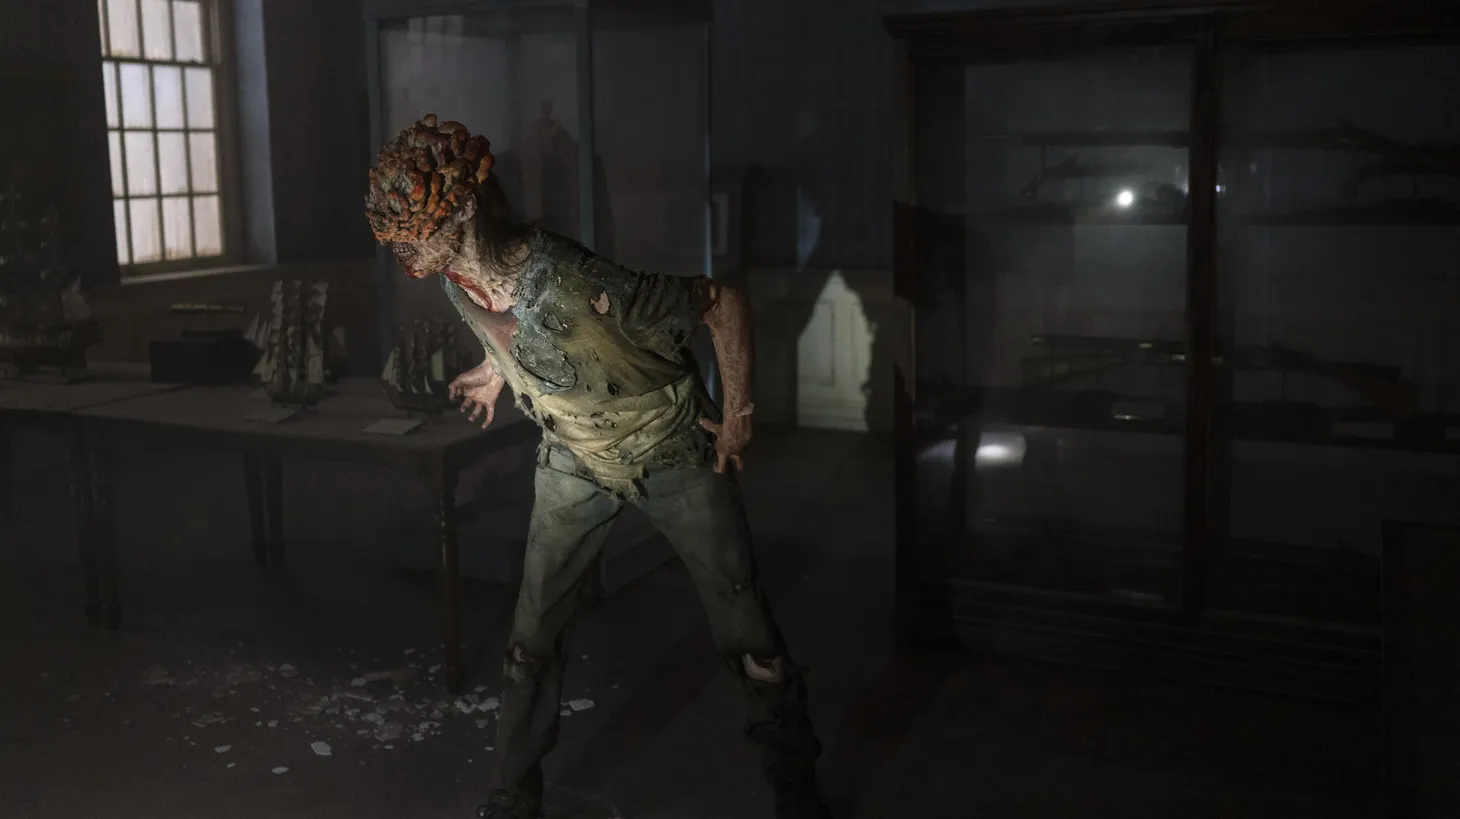 The Last Of Us Video Shows Game-Accurate Episode 1